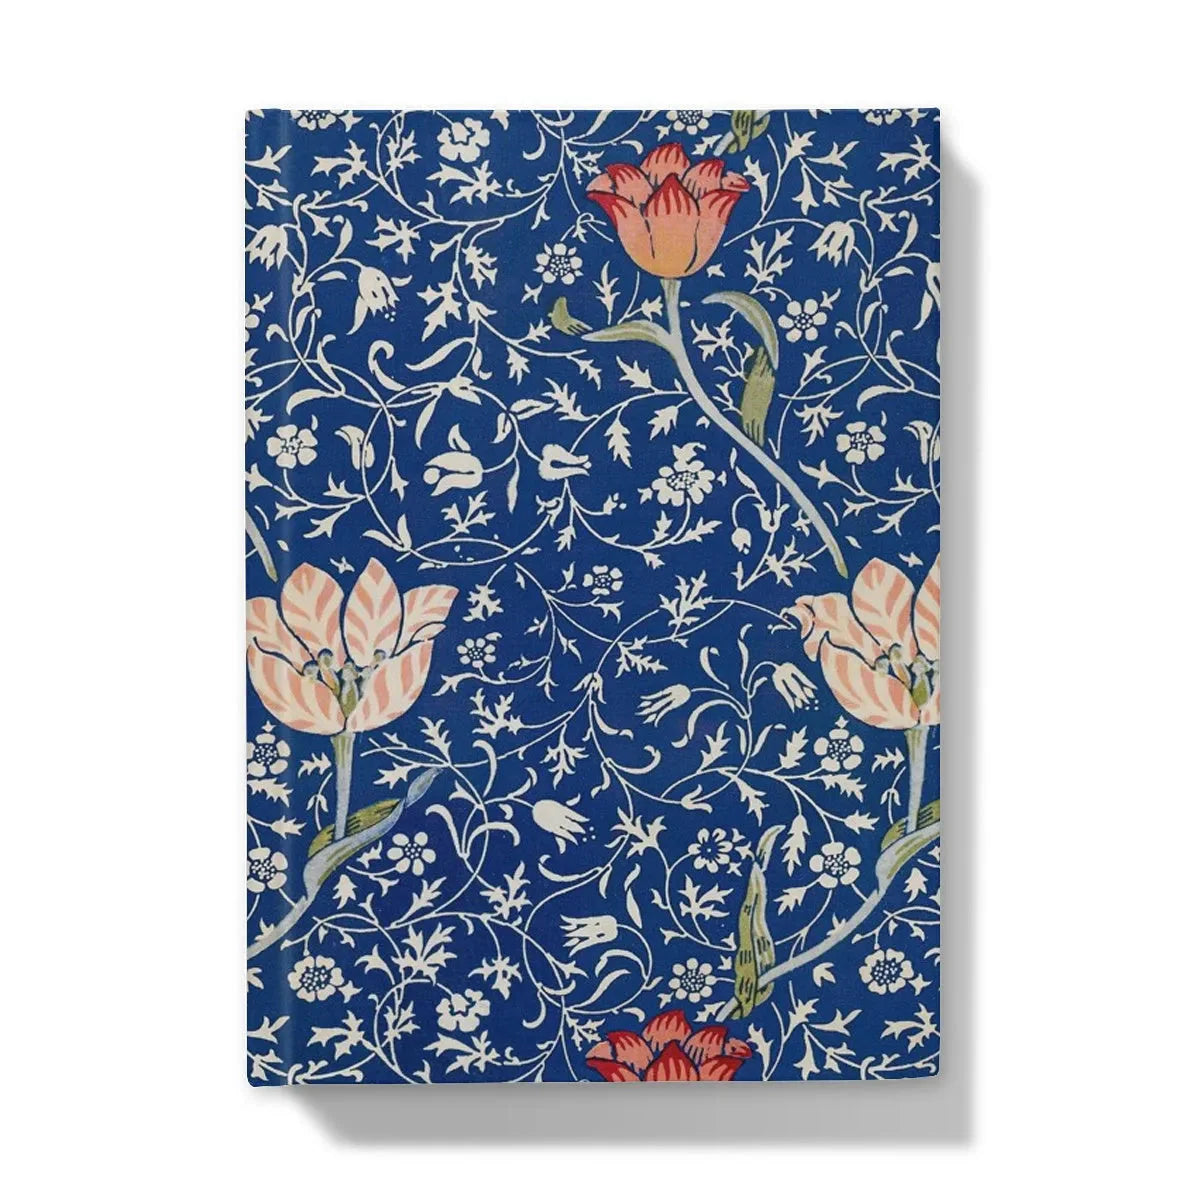 Medway By William Morris Hardback Journal - 5’x7’ / 5’ x 7’ - Lined Paper - Notebooks & Notepads - Aesthetic Art